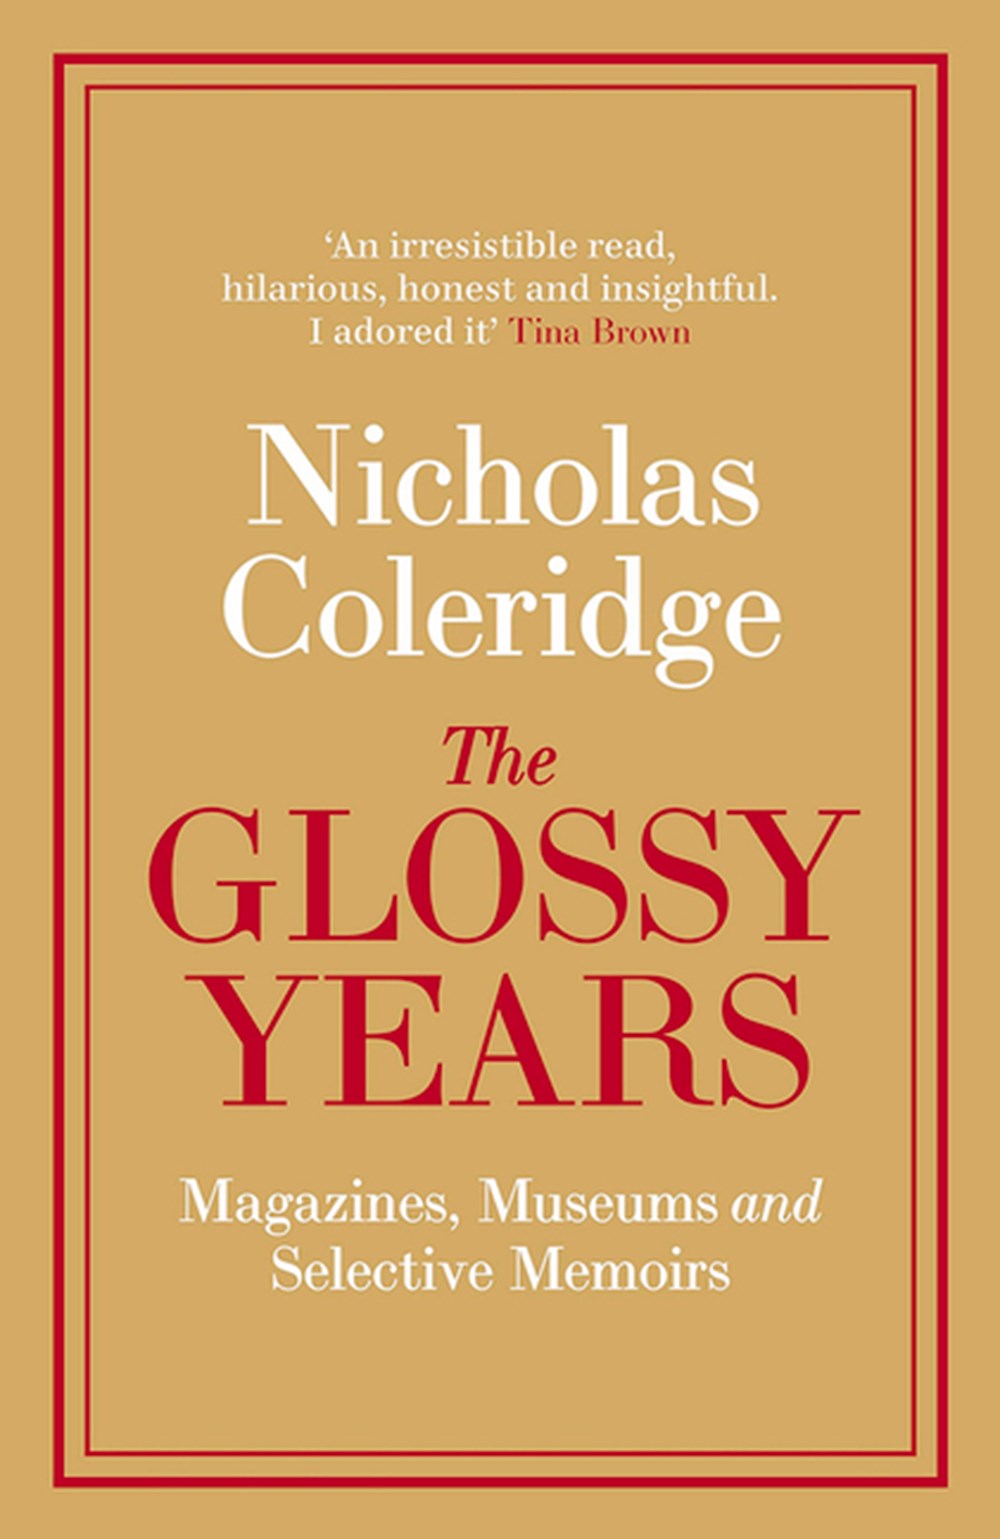 Glossy Years Magazines, Museums and Selective Memoirs